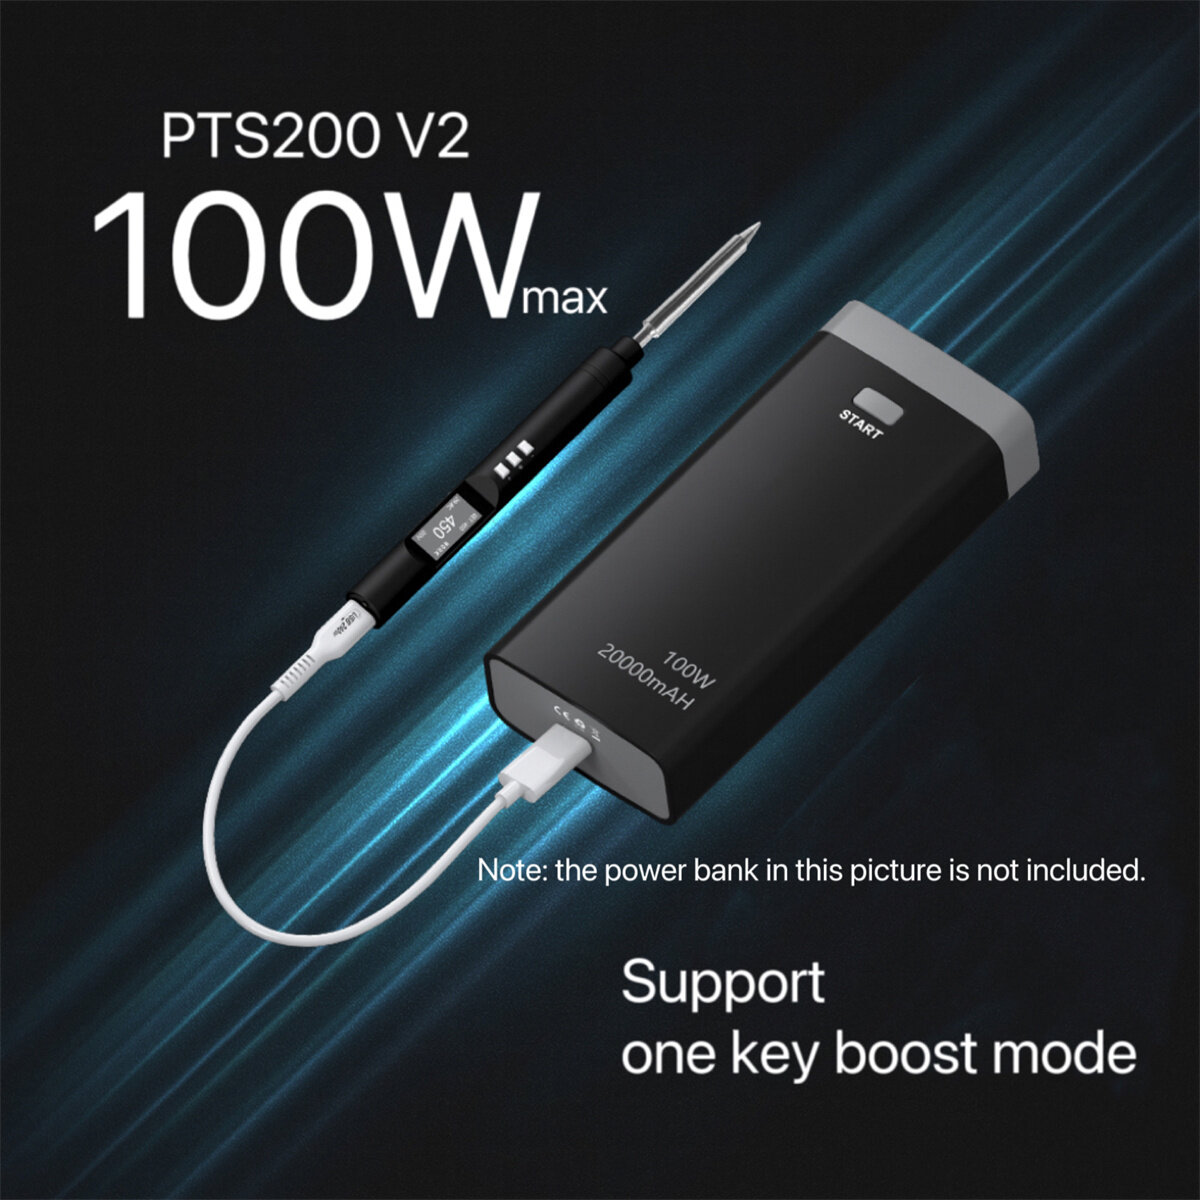 Drillpro PTS200 V2 100W Electric Soldering Iron Portable Quick Warm-Up Tin Melting Open Source Supports PD3.0 Firmware Upgradeable Battery Not Included T12/TS100 Compatible